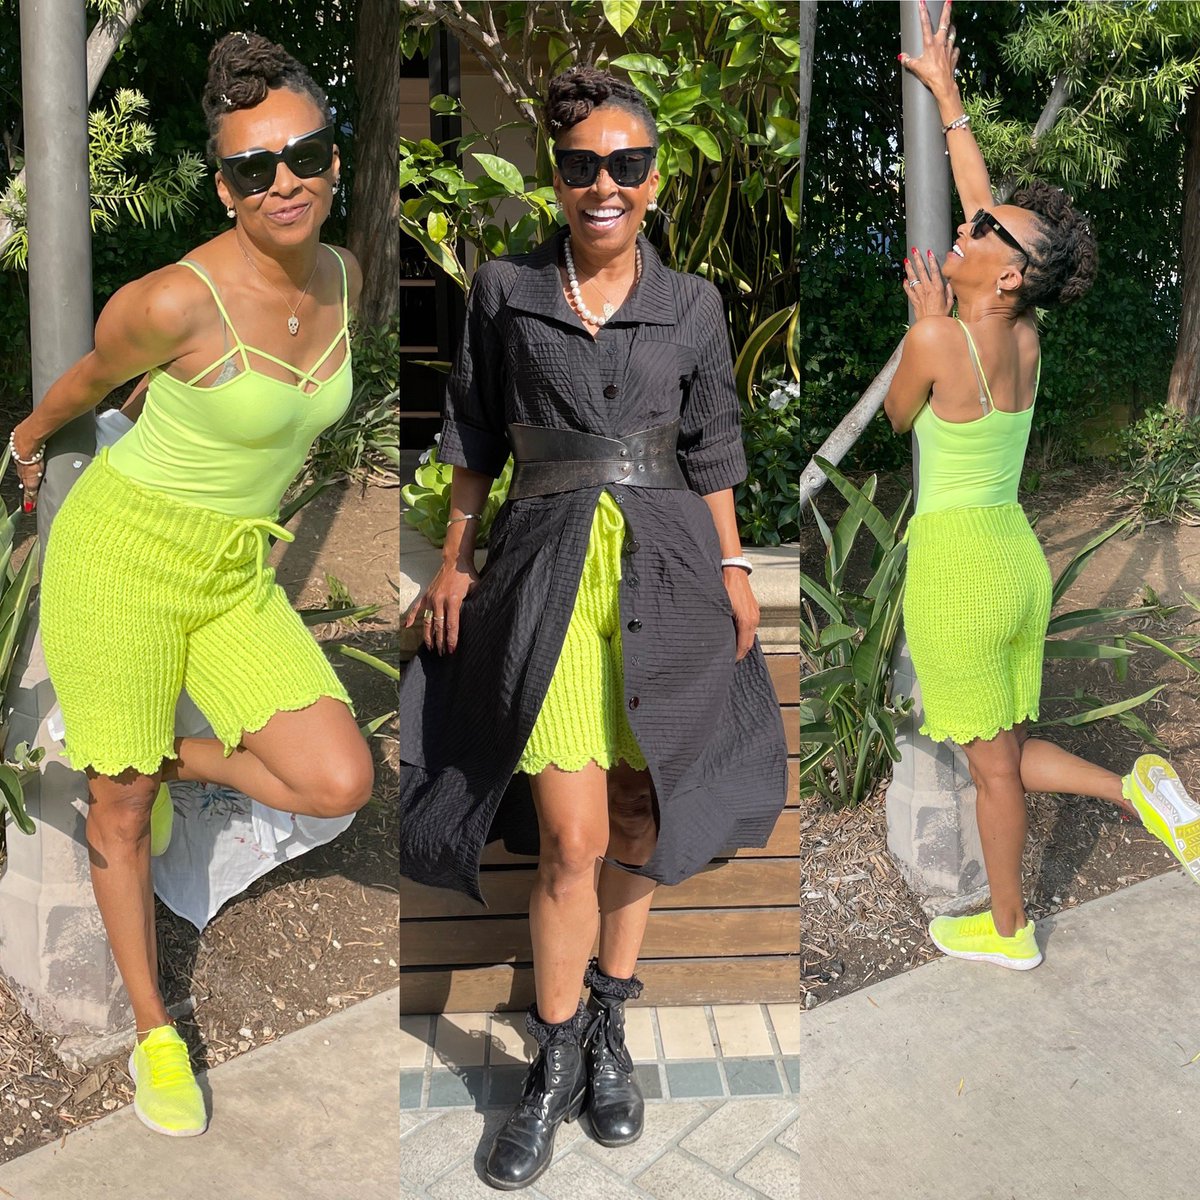 Feels good to be rockin’ my latest hand-crocheted creation, a pair of #bicycle shorts made from @KnitPicks brand highlighter yellow #yarn. I began from a pattern for booty shorts, but lengthened it. So comfy!

#siedahcreations #crocheter #crochet #ootd #fashion #blackcreatives